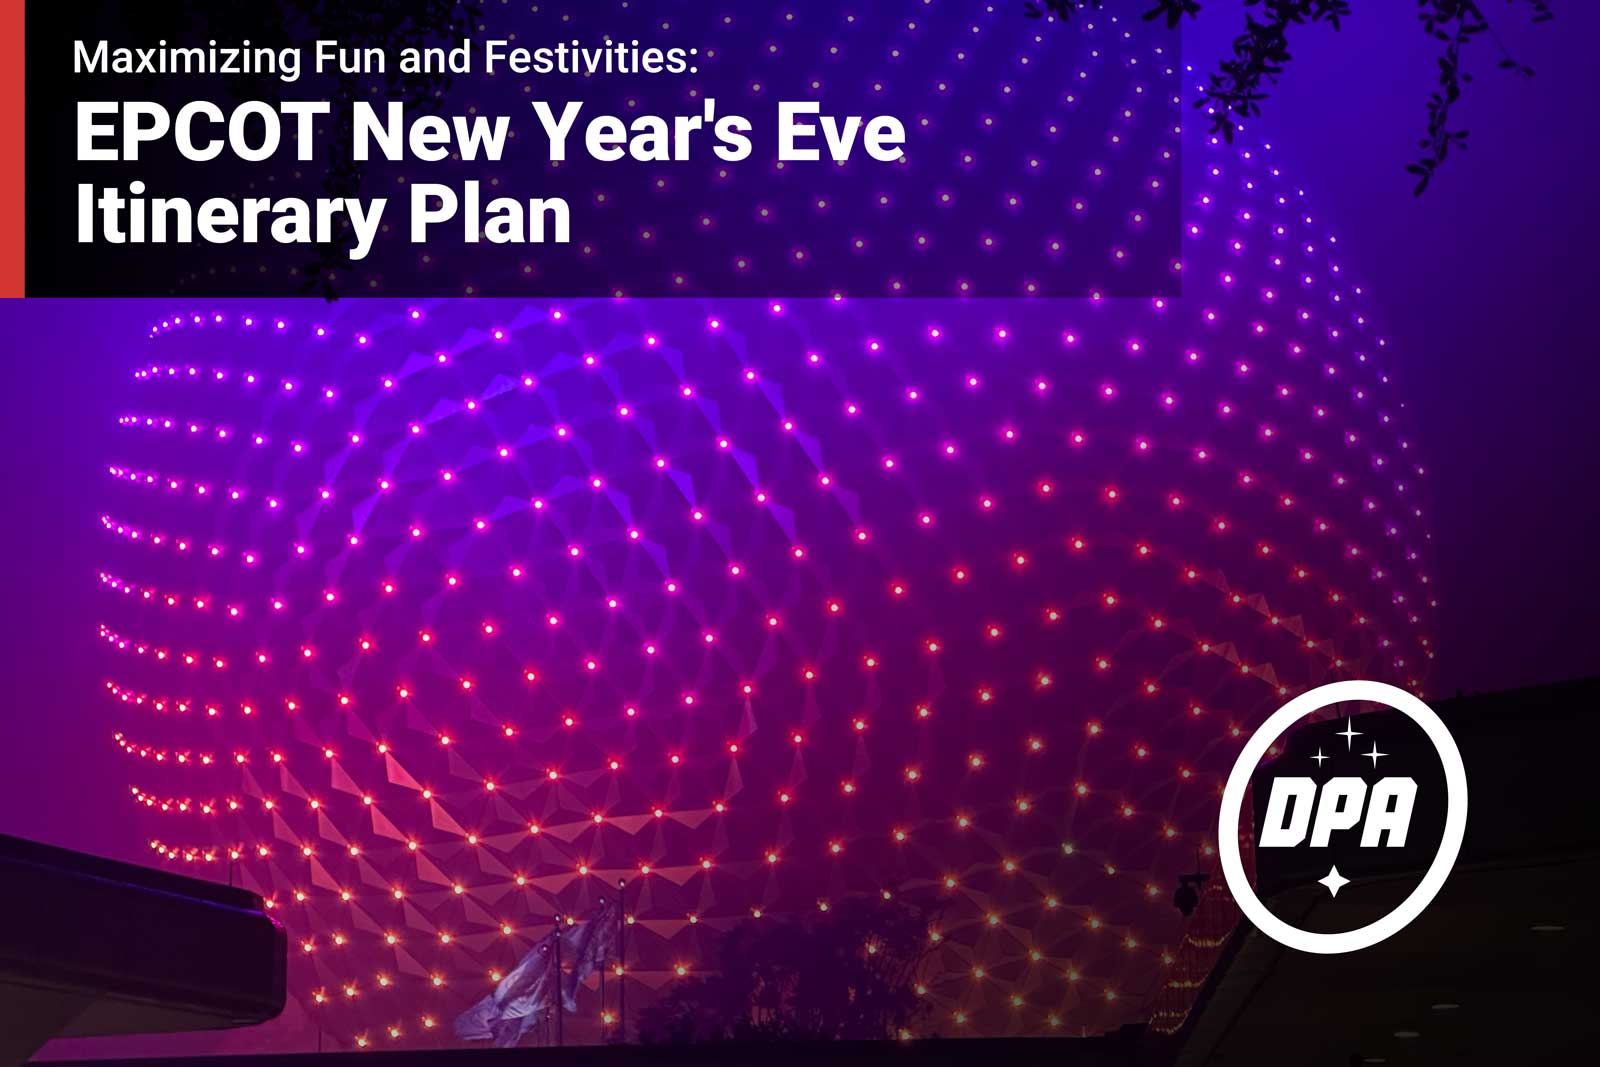 EPCOT New Year's Eve Itinerary Plan